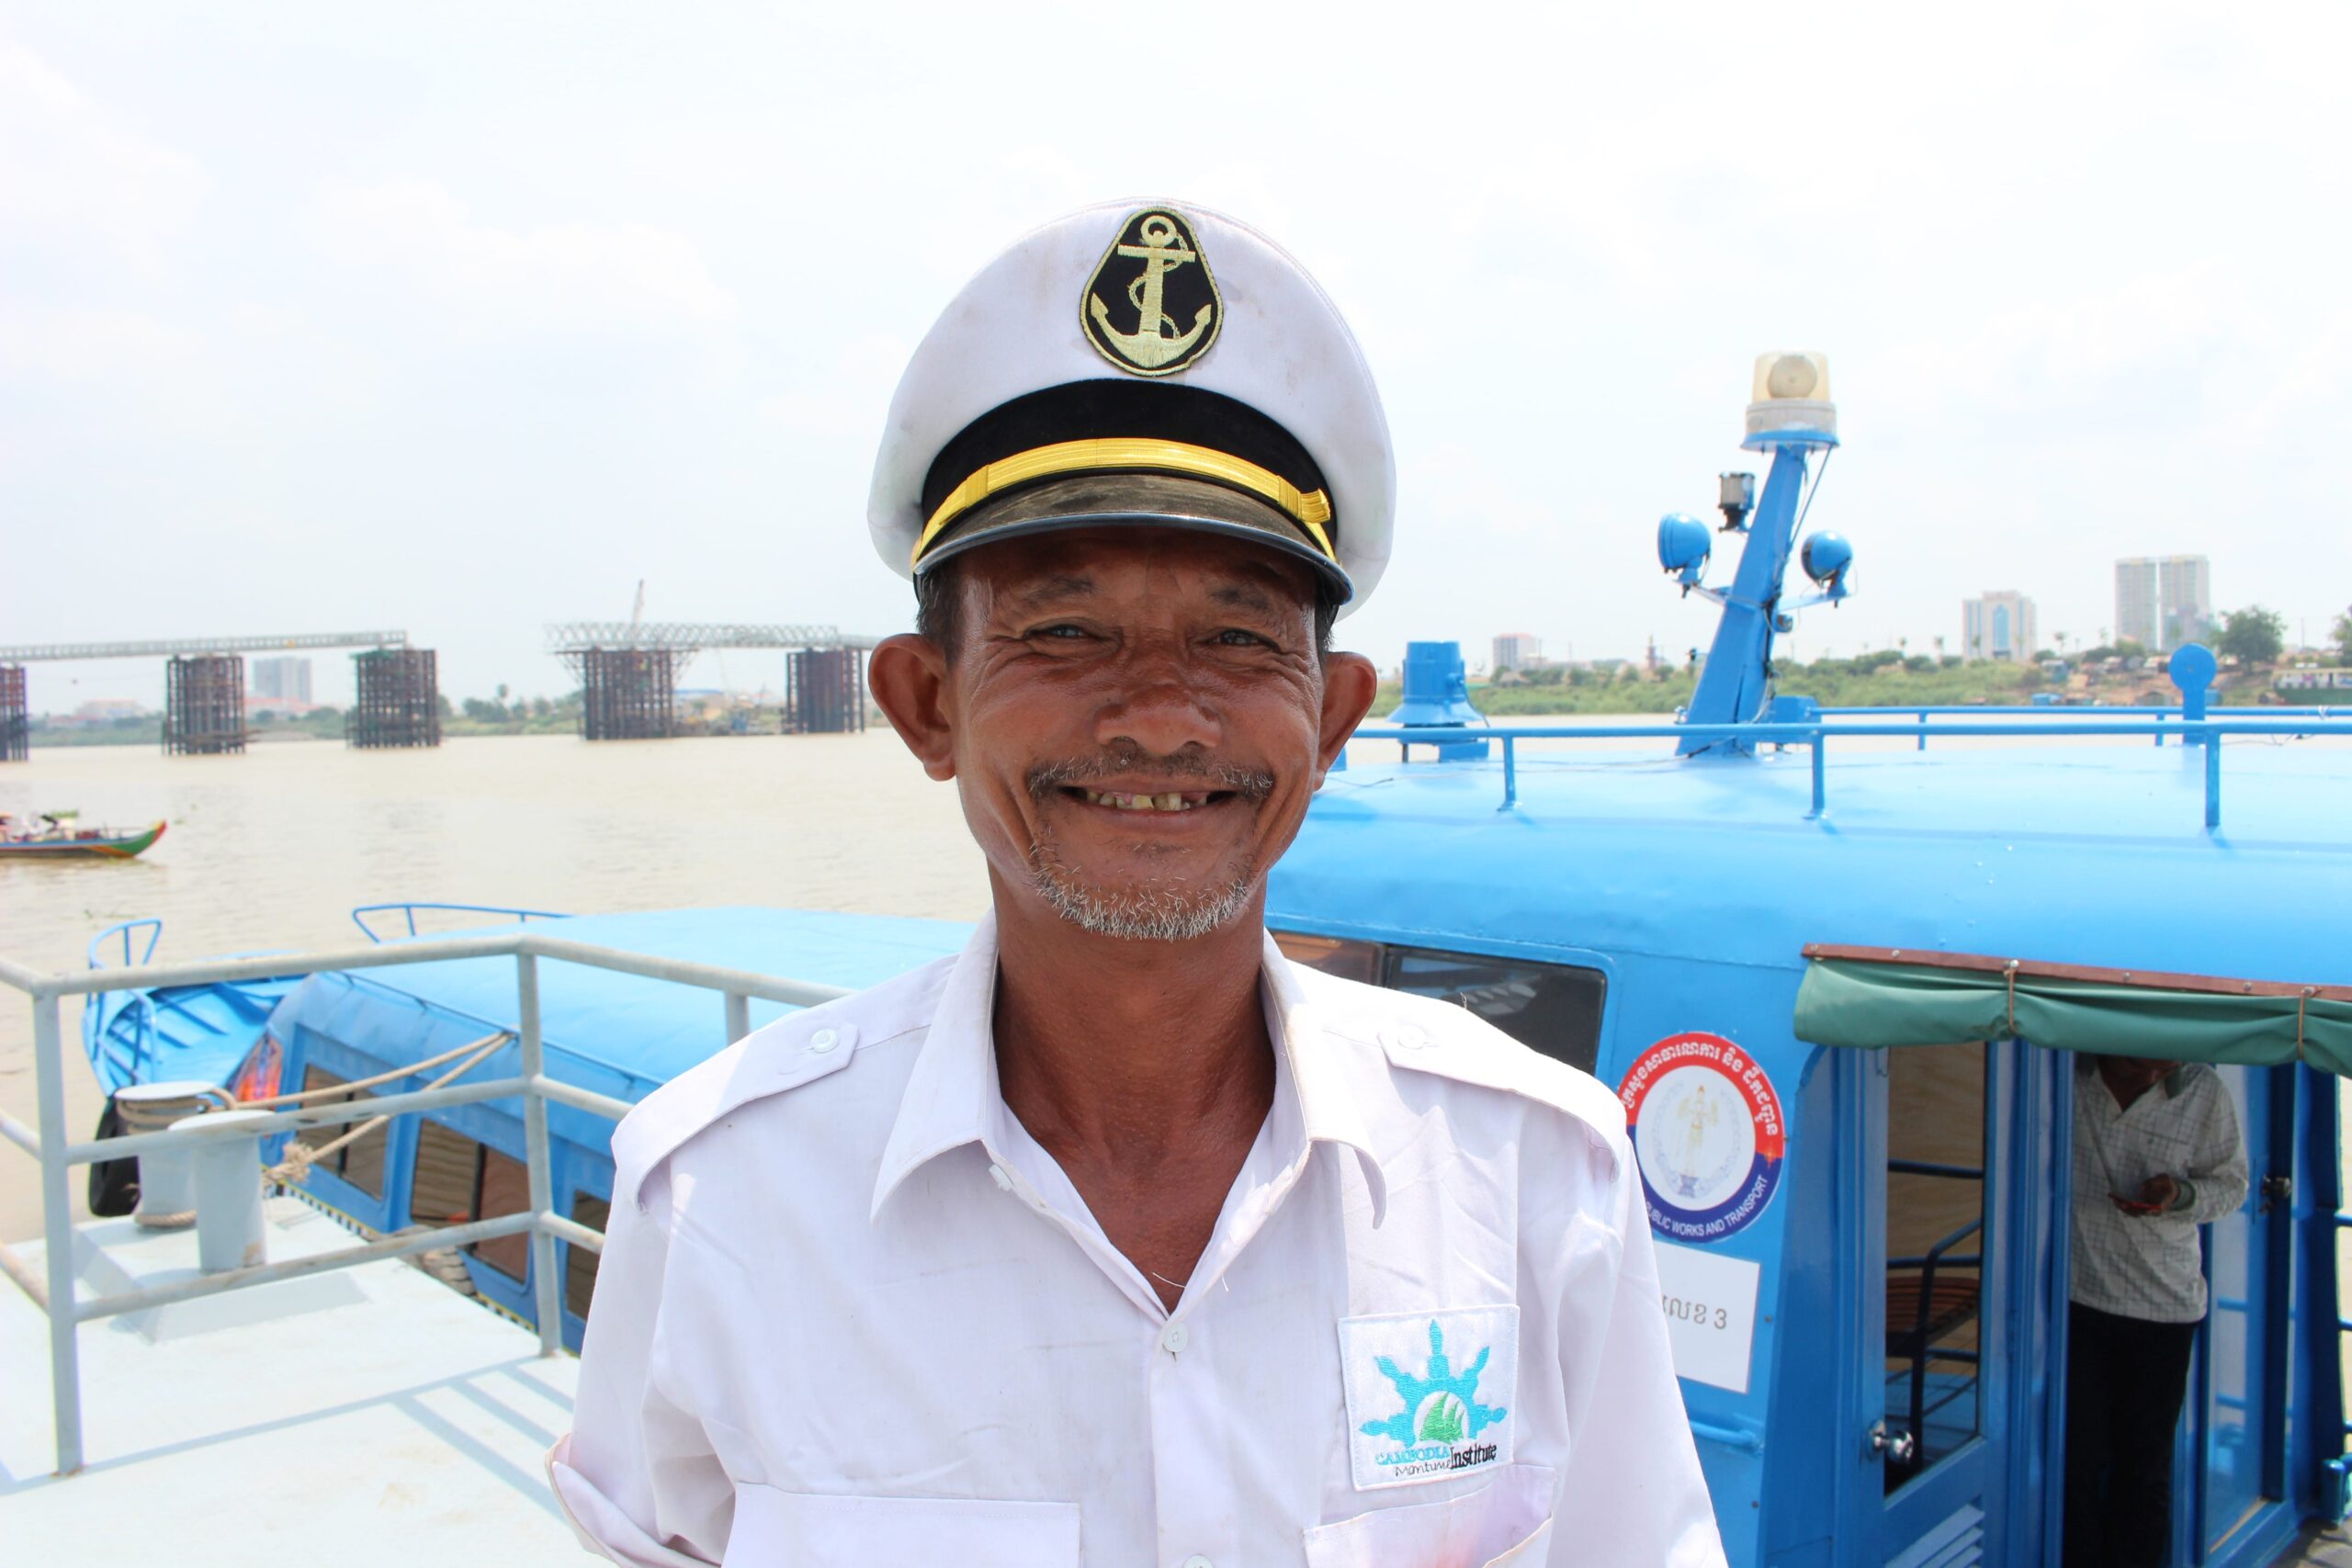 In April Phnom Penh’s new water taxi service launched, a new way to avoid the city’s worsening traffic jams. With free fares, we tried out this groundbreaking service【Water Taxi】